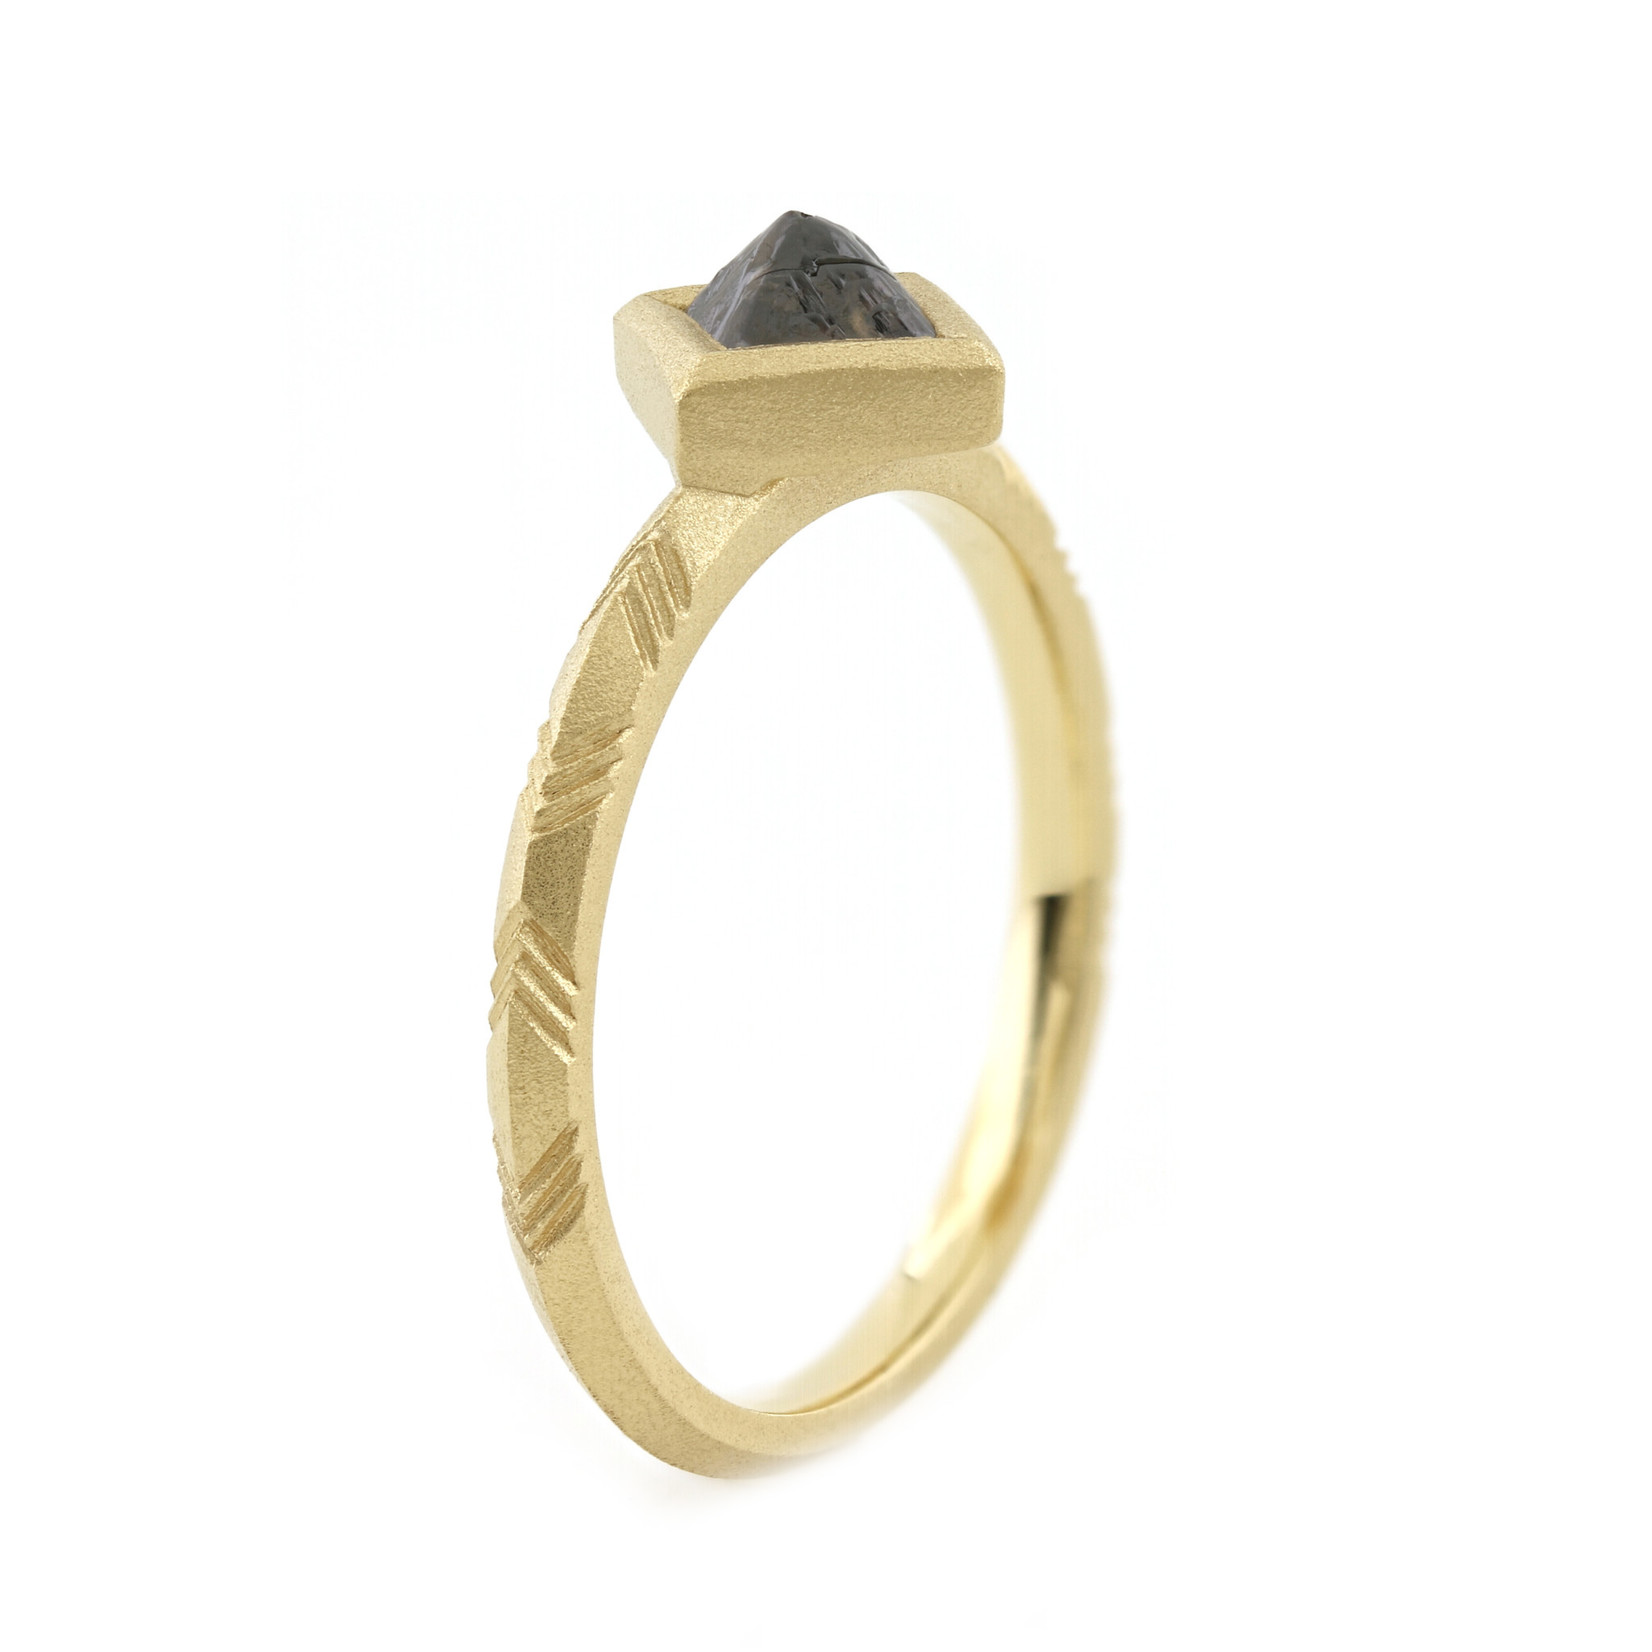 Baxter Moerman Shelby Ring with Sawn Octahedron Diamond in Yellow Gold